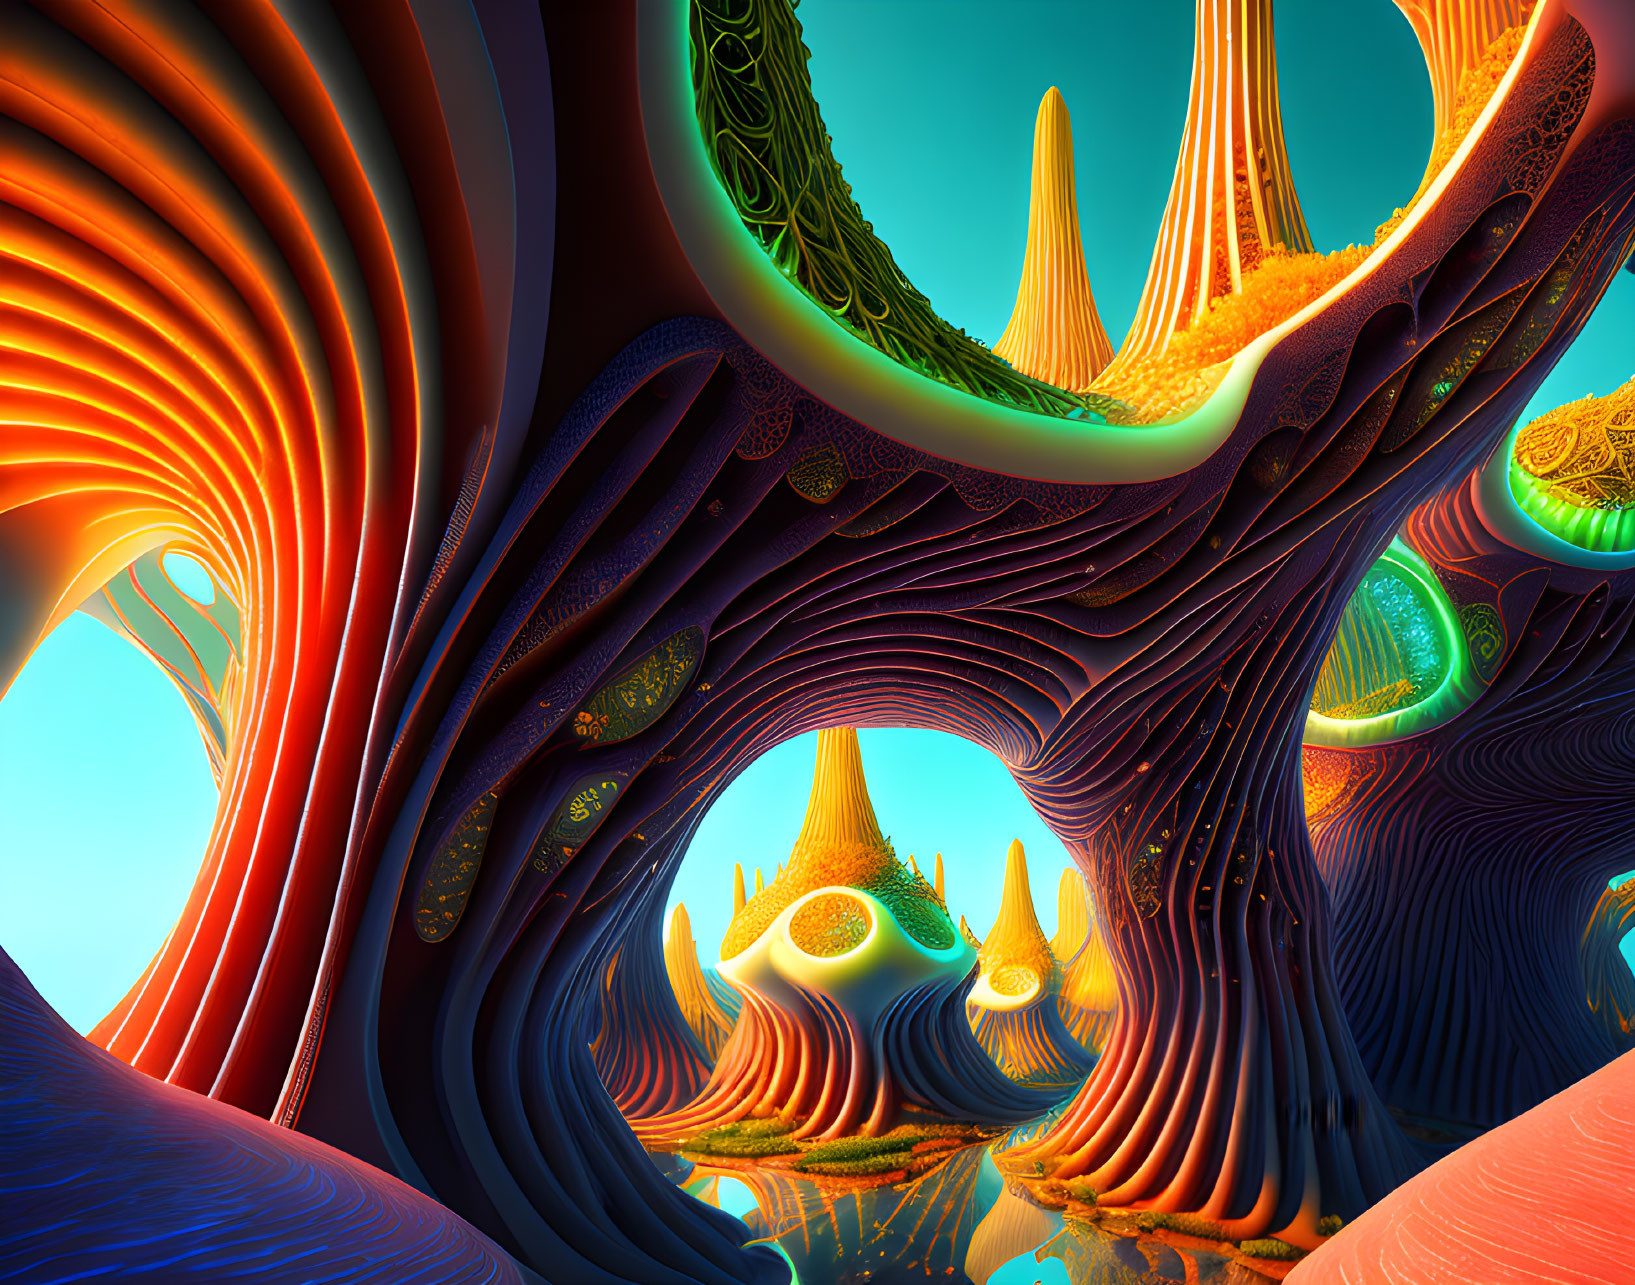 Colorful Abstract Fractal Art with Swirling Structures